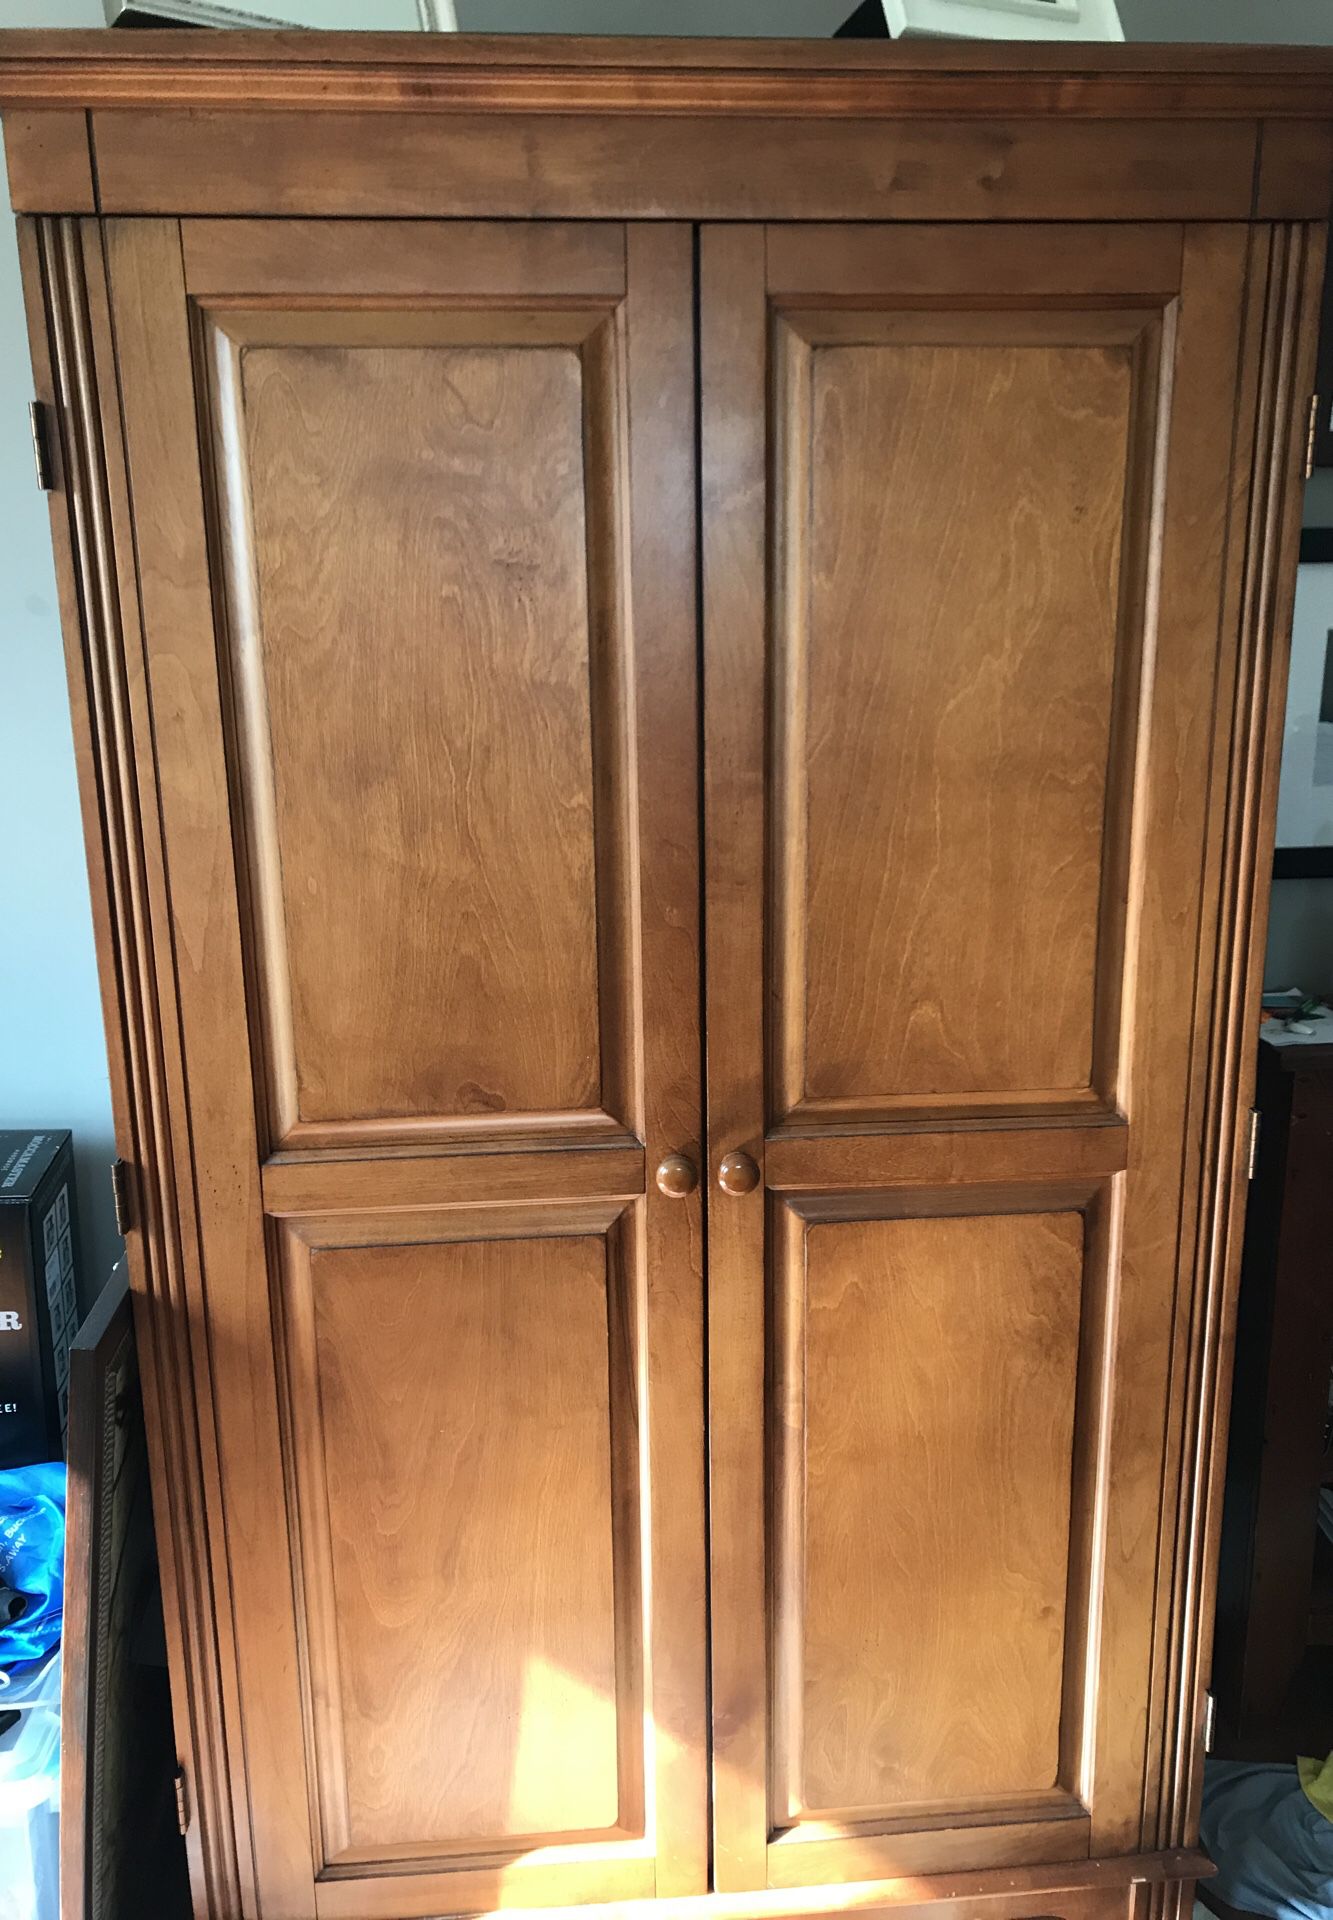 Classic TV or clothing Armoire!